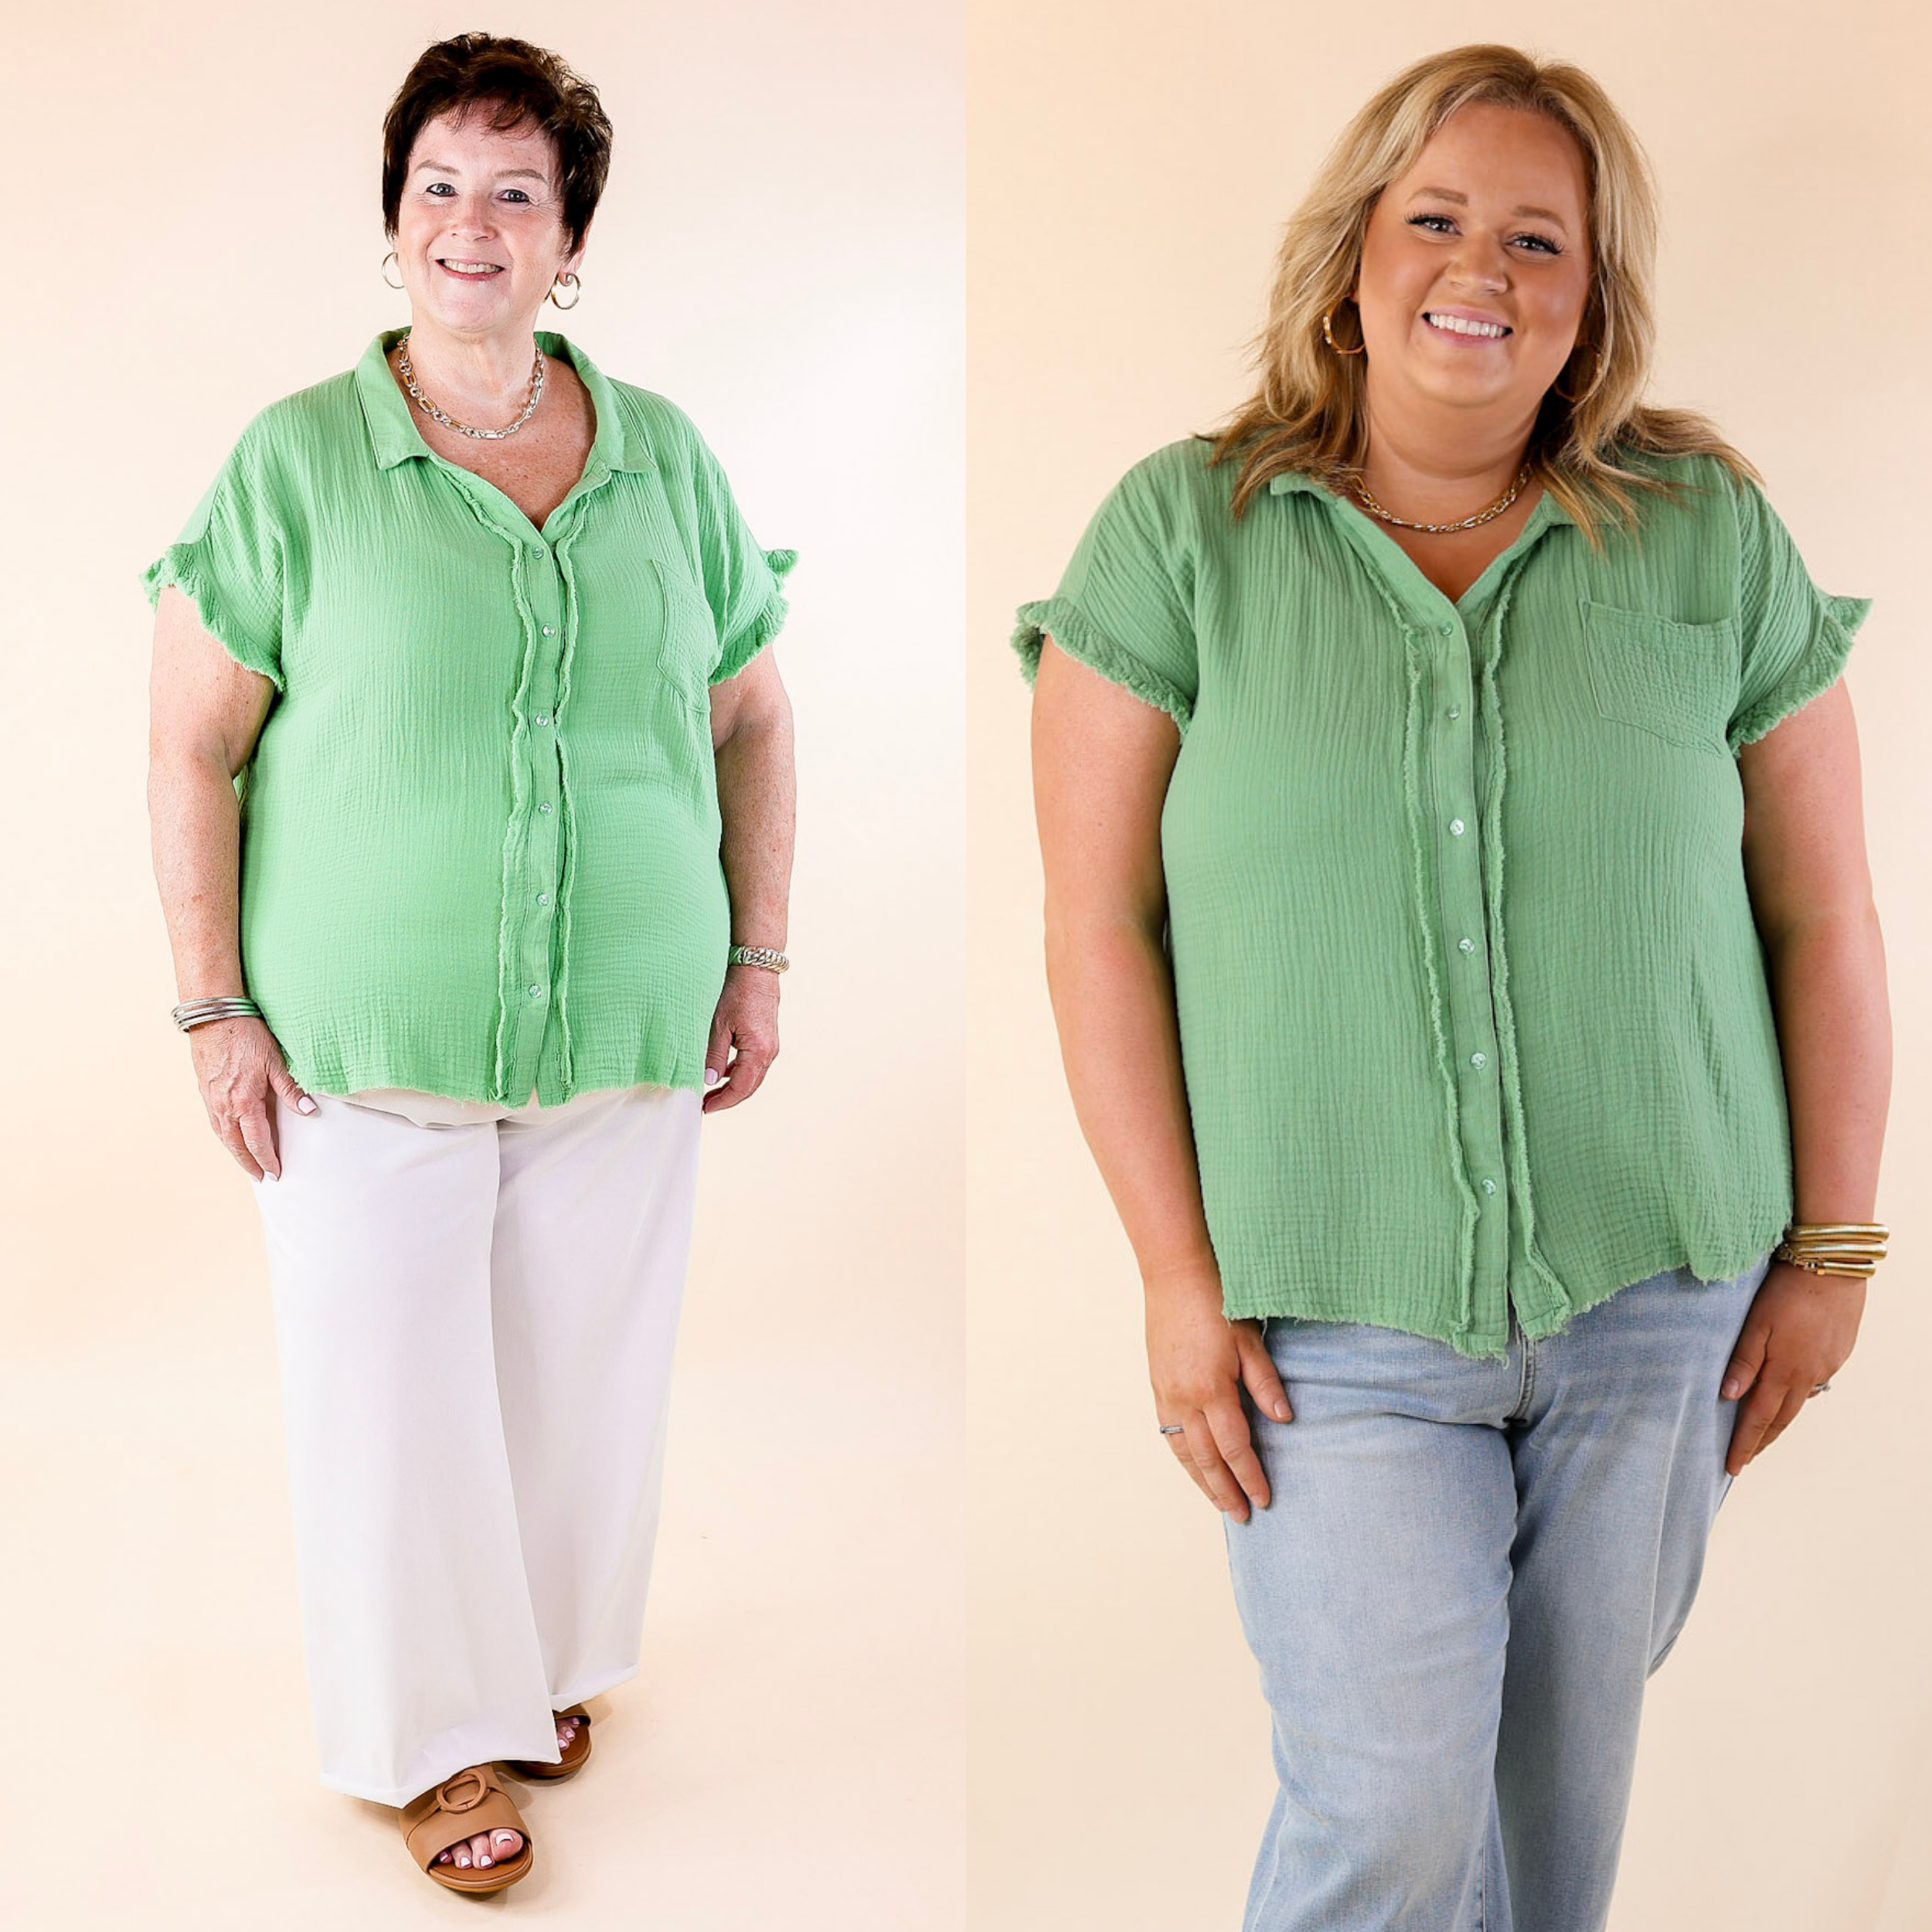 Right On Cue Button Up Raw Hem Top in Spring Green - Giddy Up Glamour Boutique